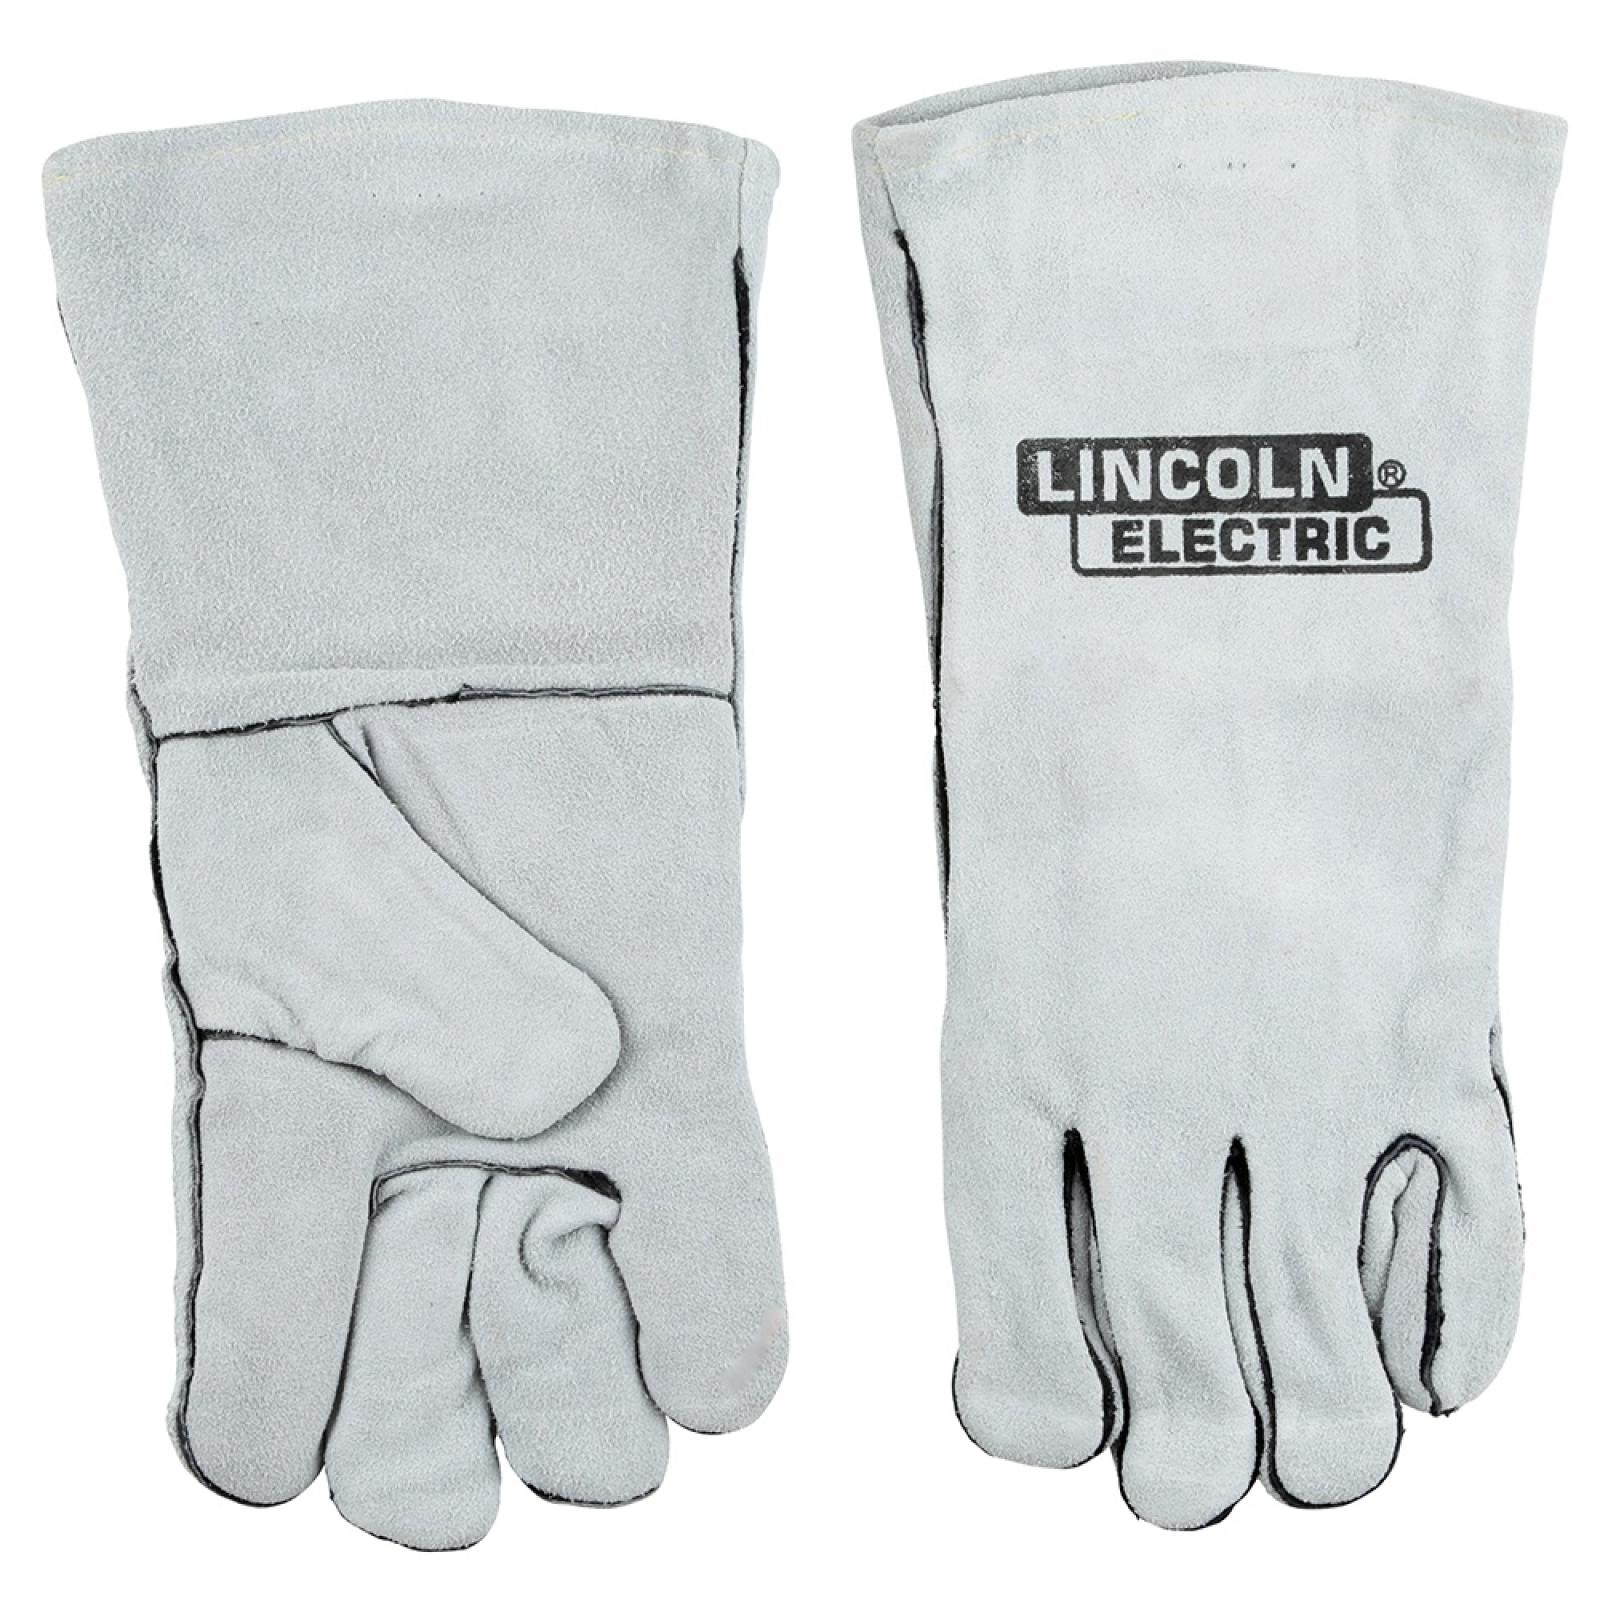 Lincoln Electric Welding Gloves